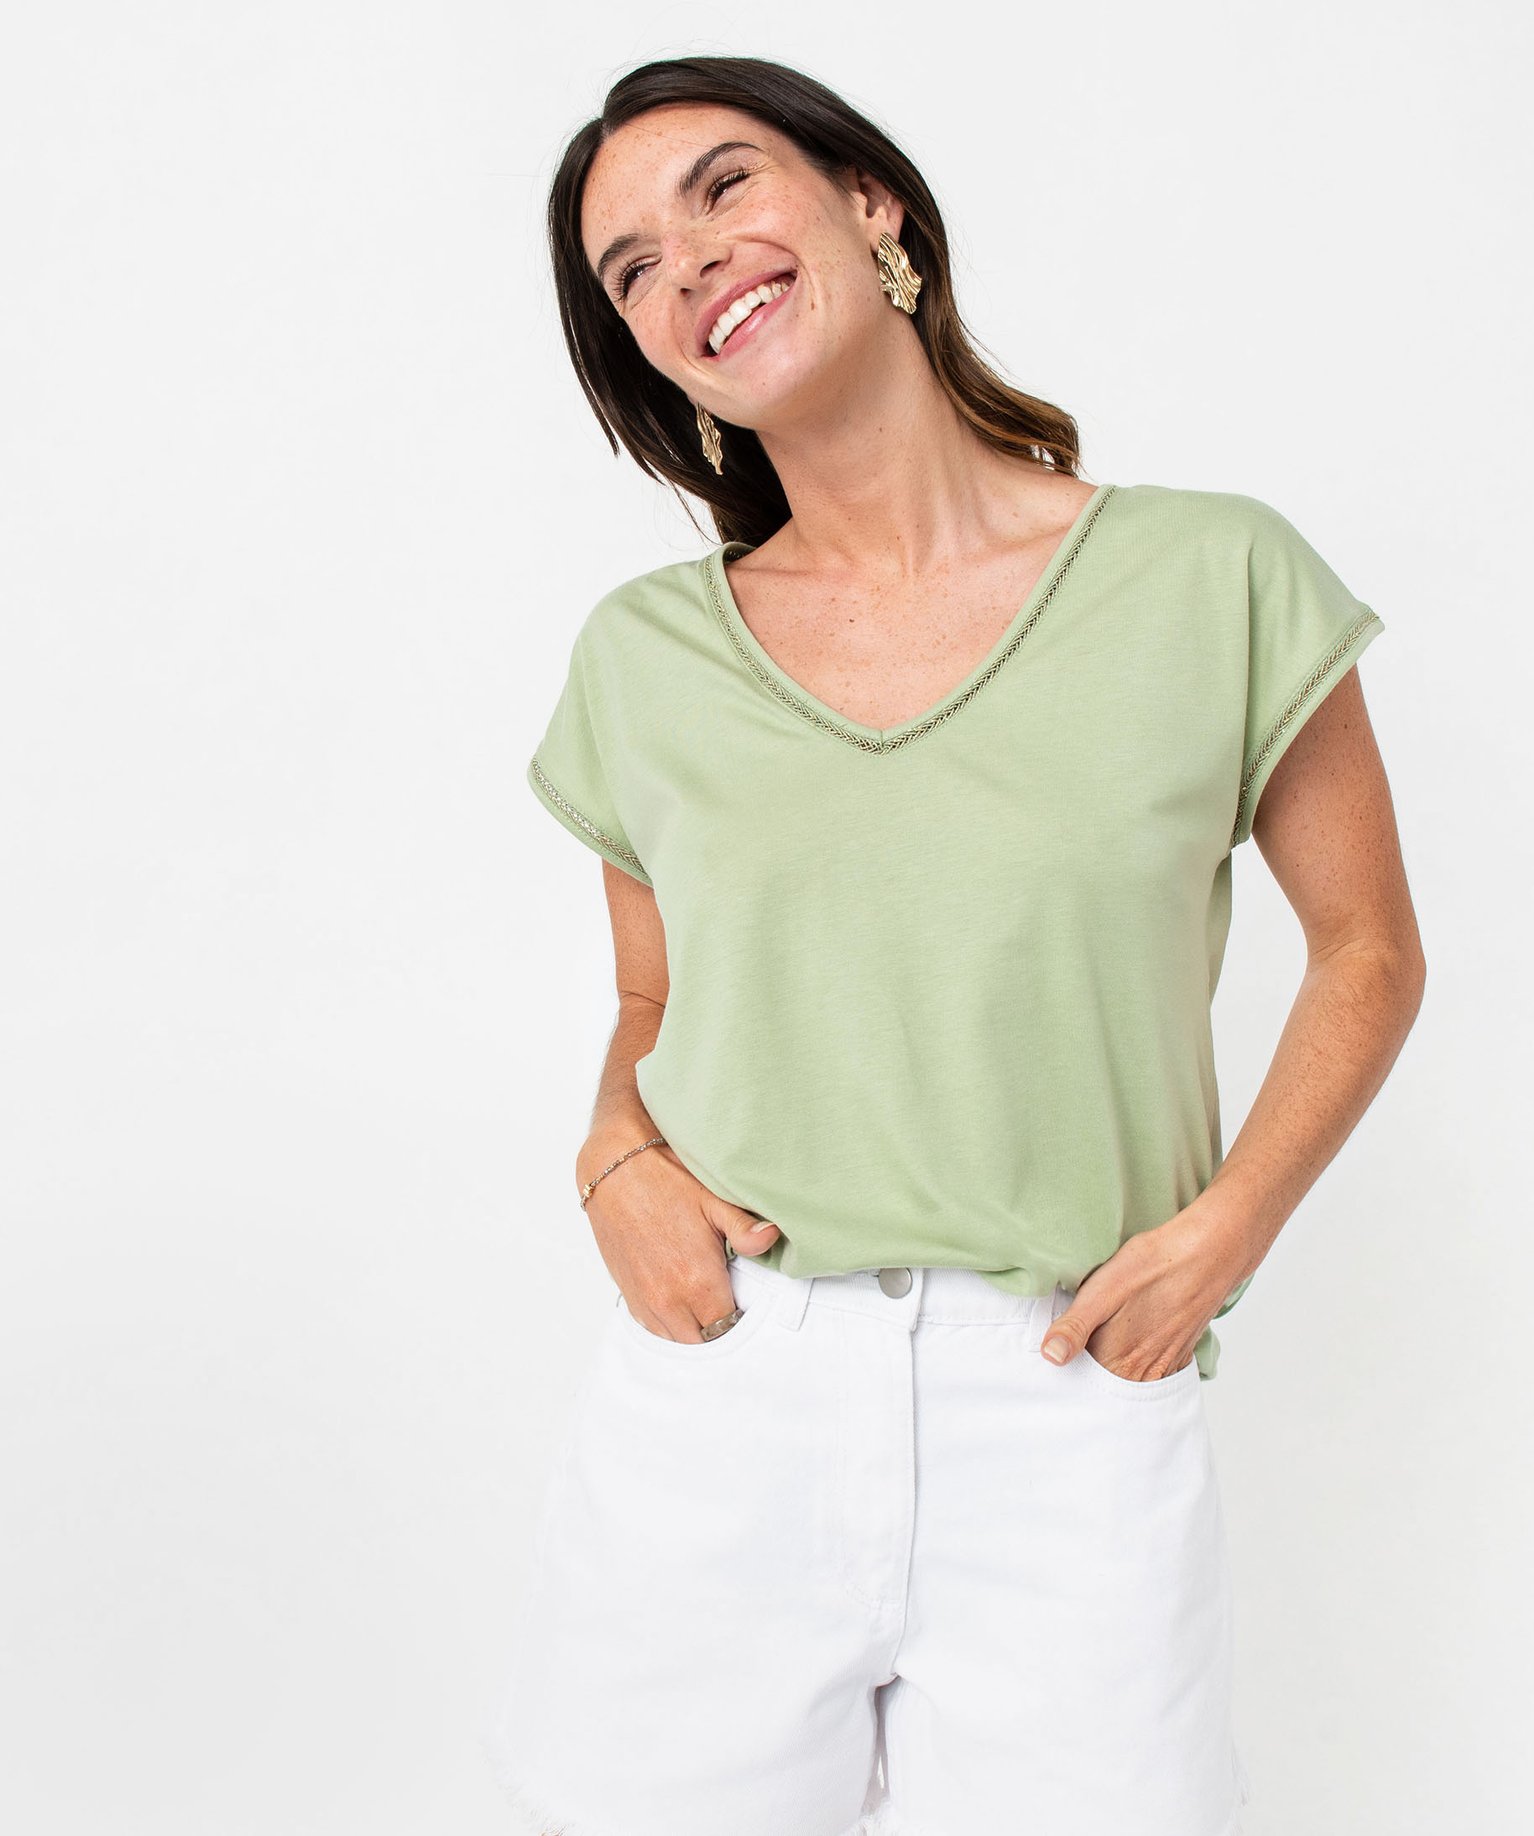 tee-shirt manches courtes a finition tressee pailletee femme vert t-shirts manches courtes